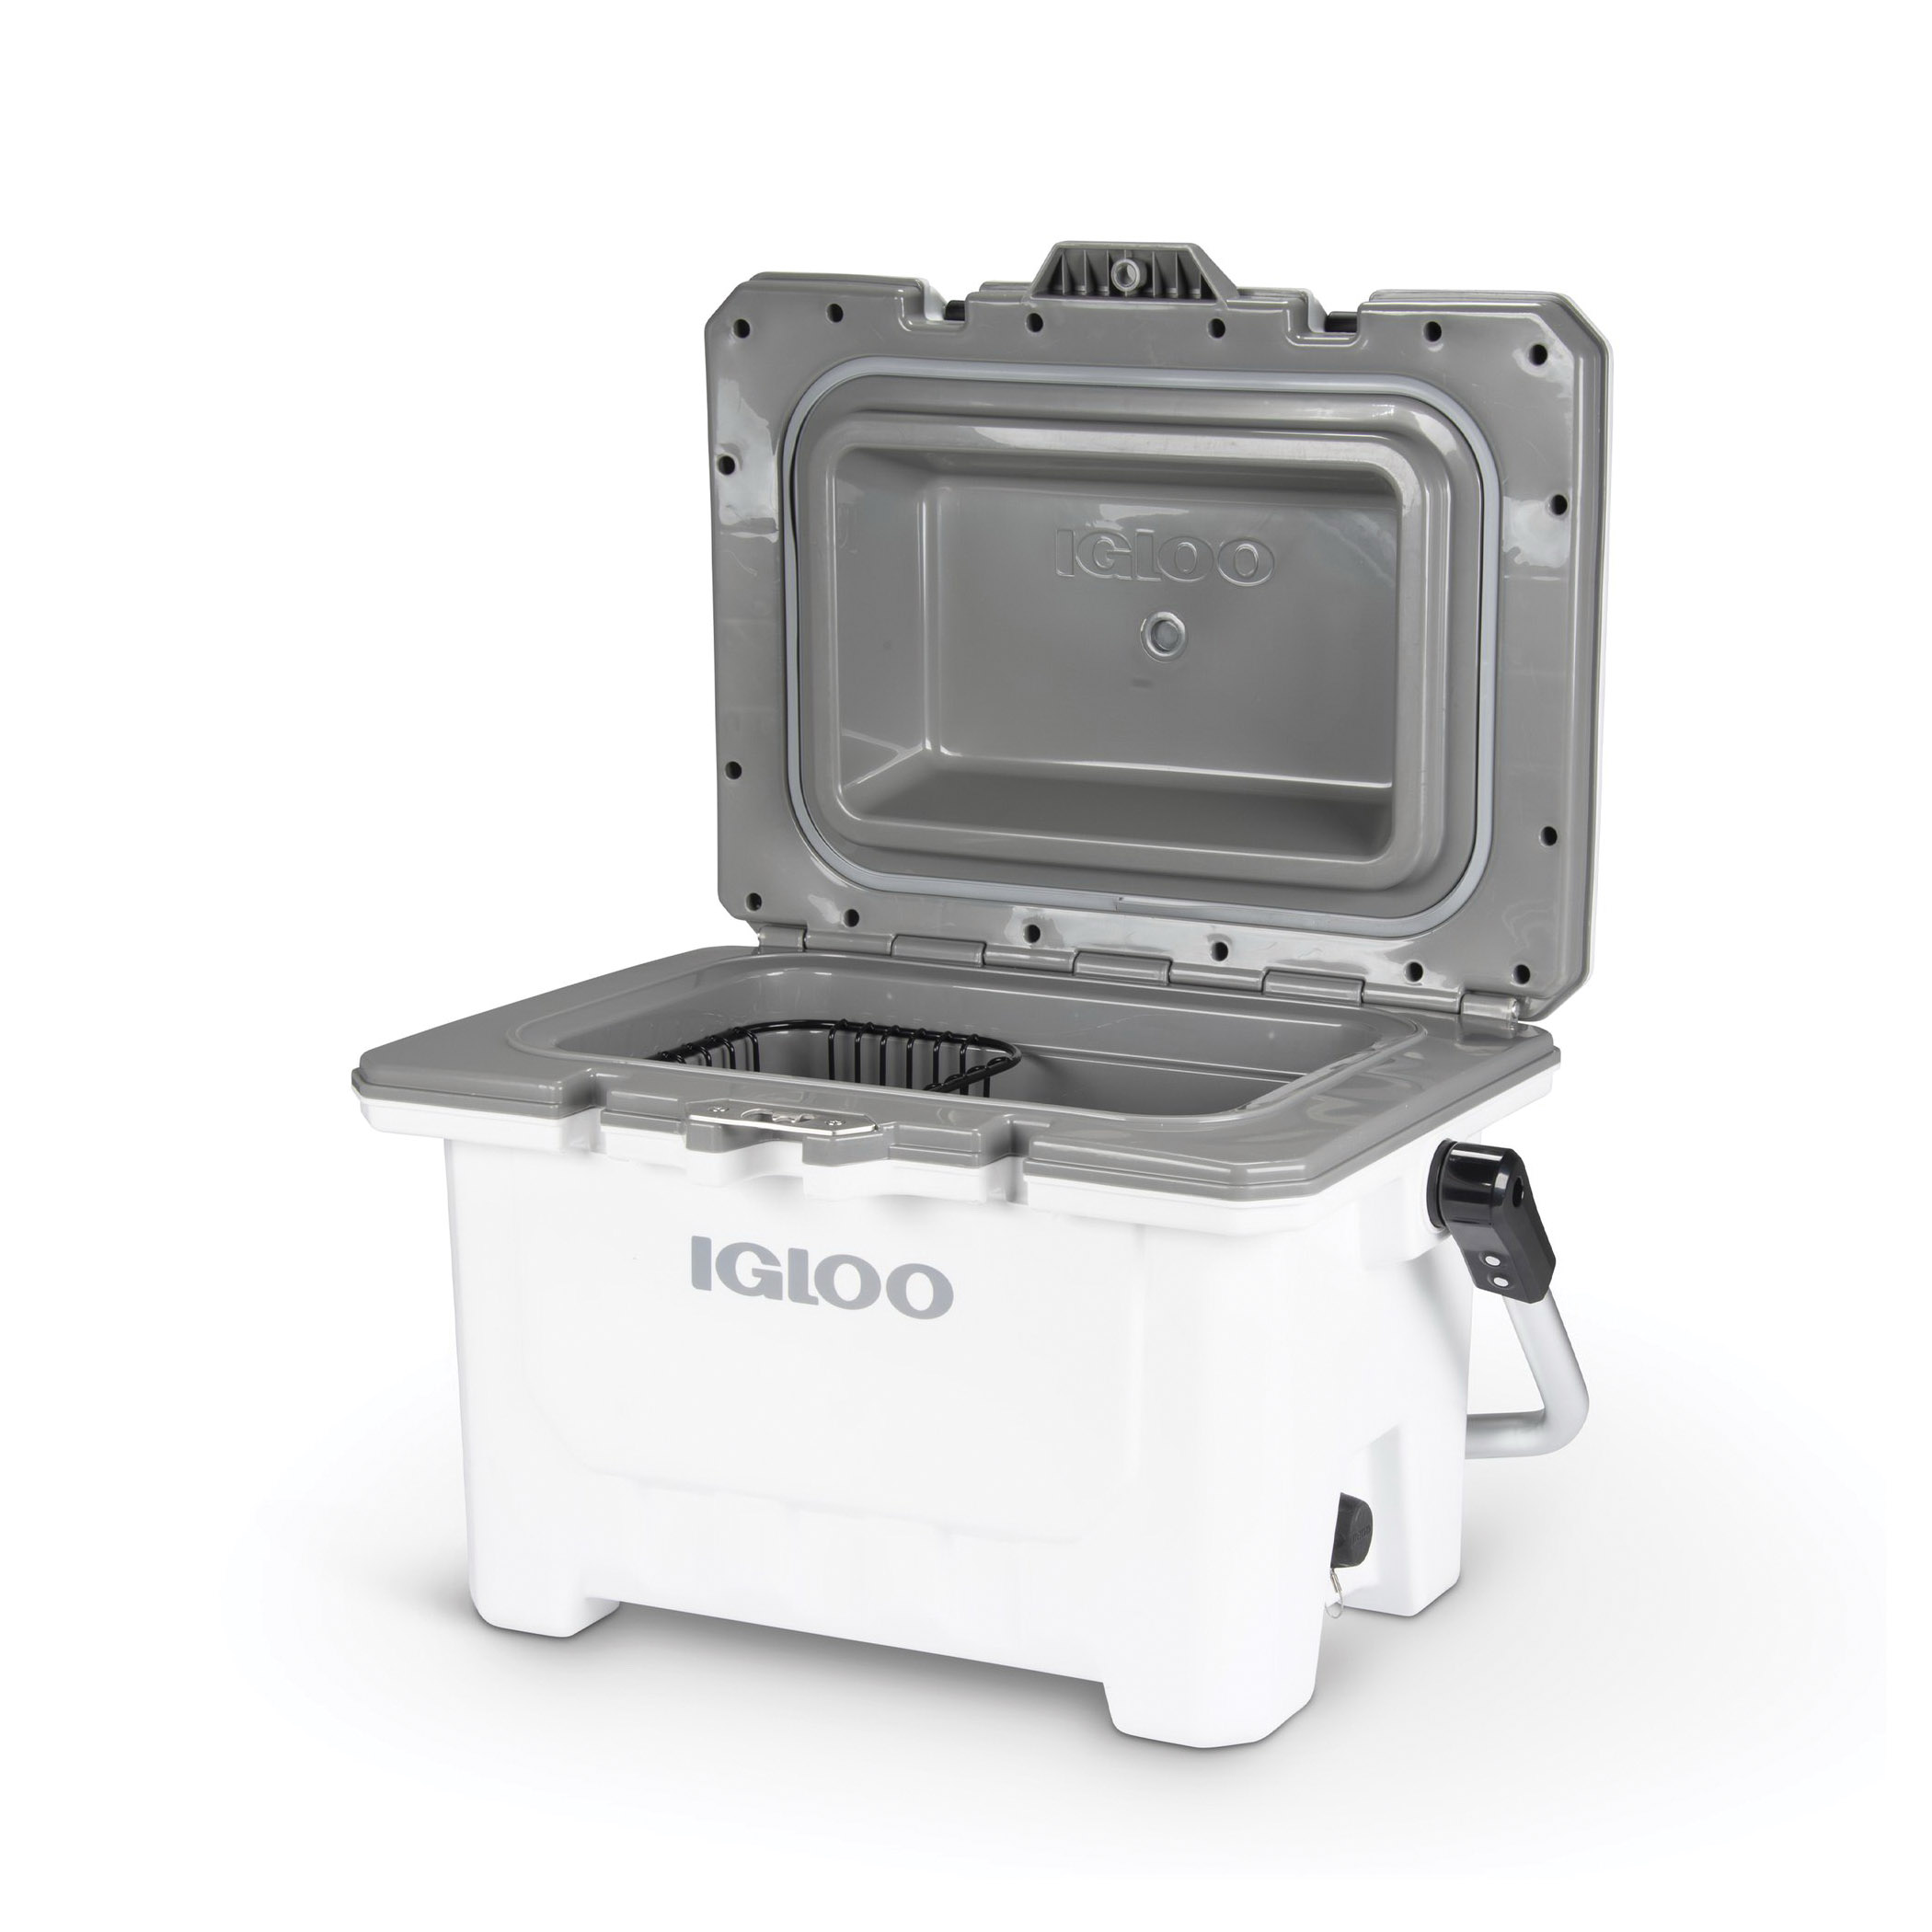 IGLOO IMX 49829 Cooler, 7.3 kg Cooler, Rubber/Stainless Steel, White - 3